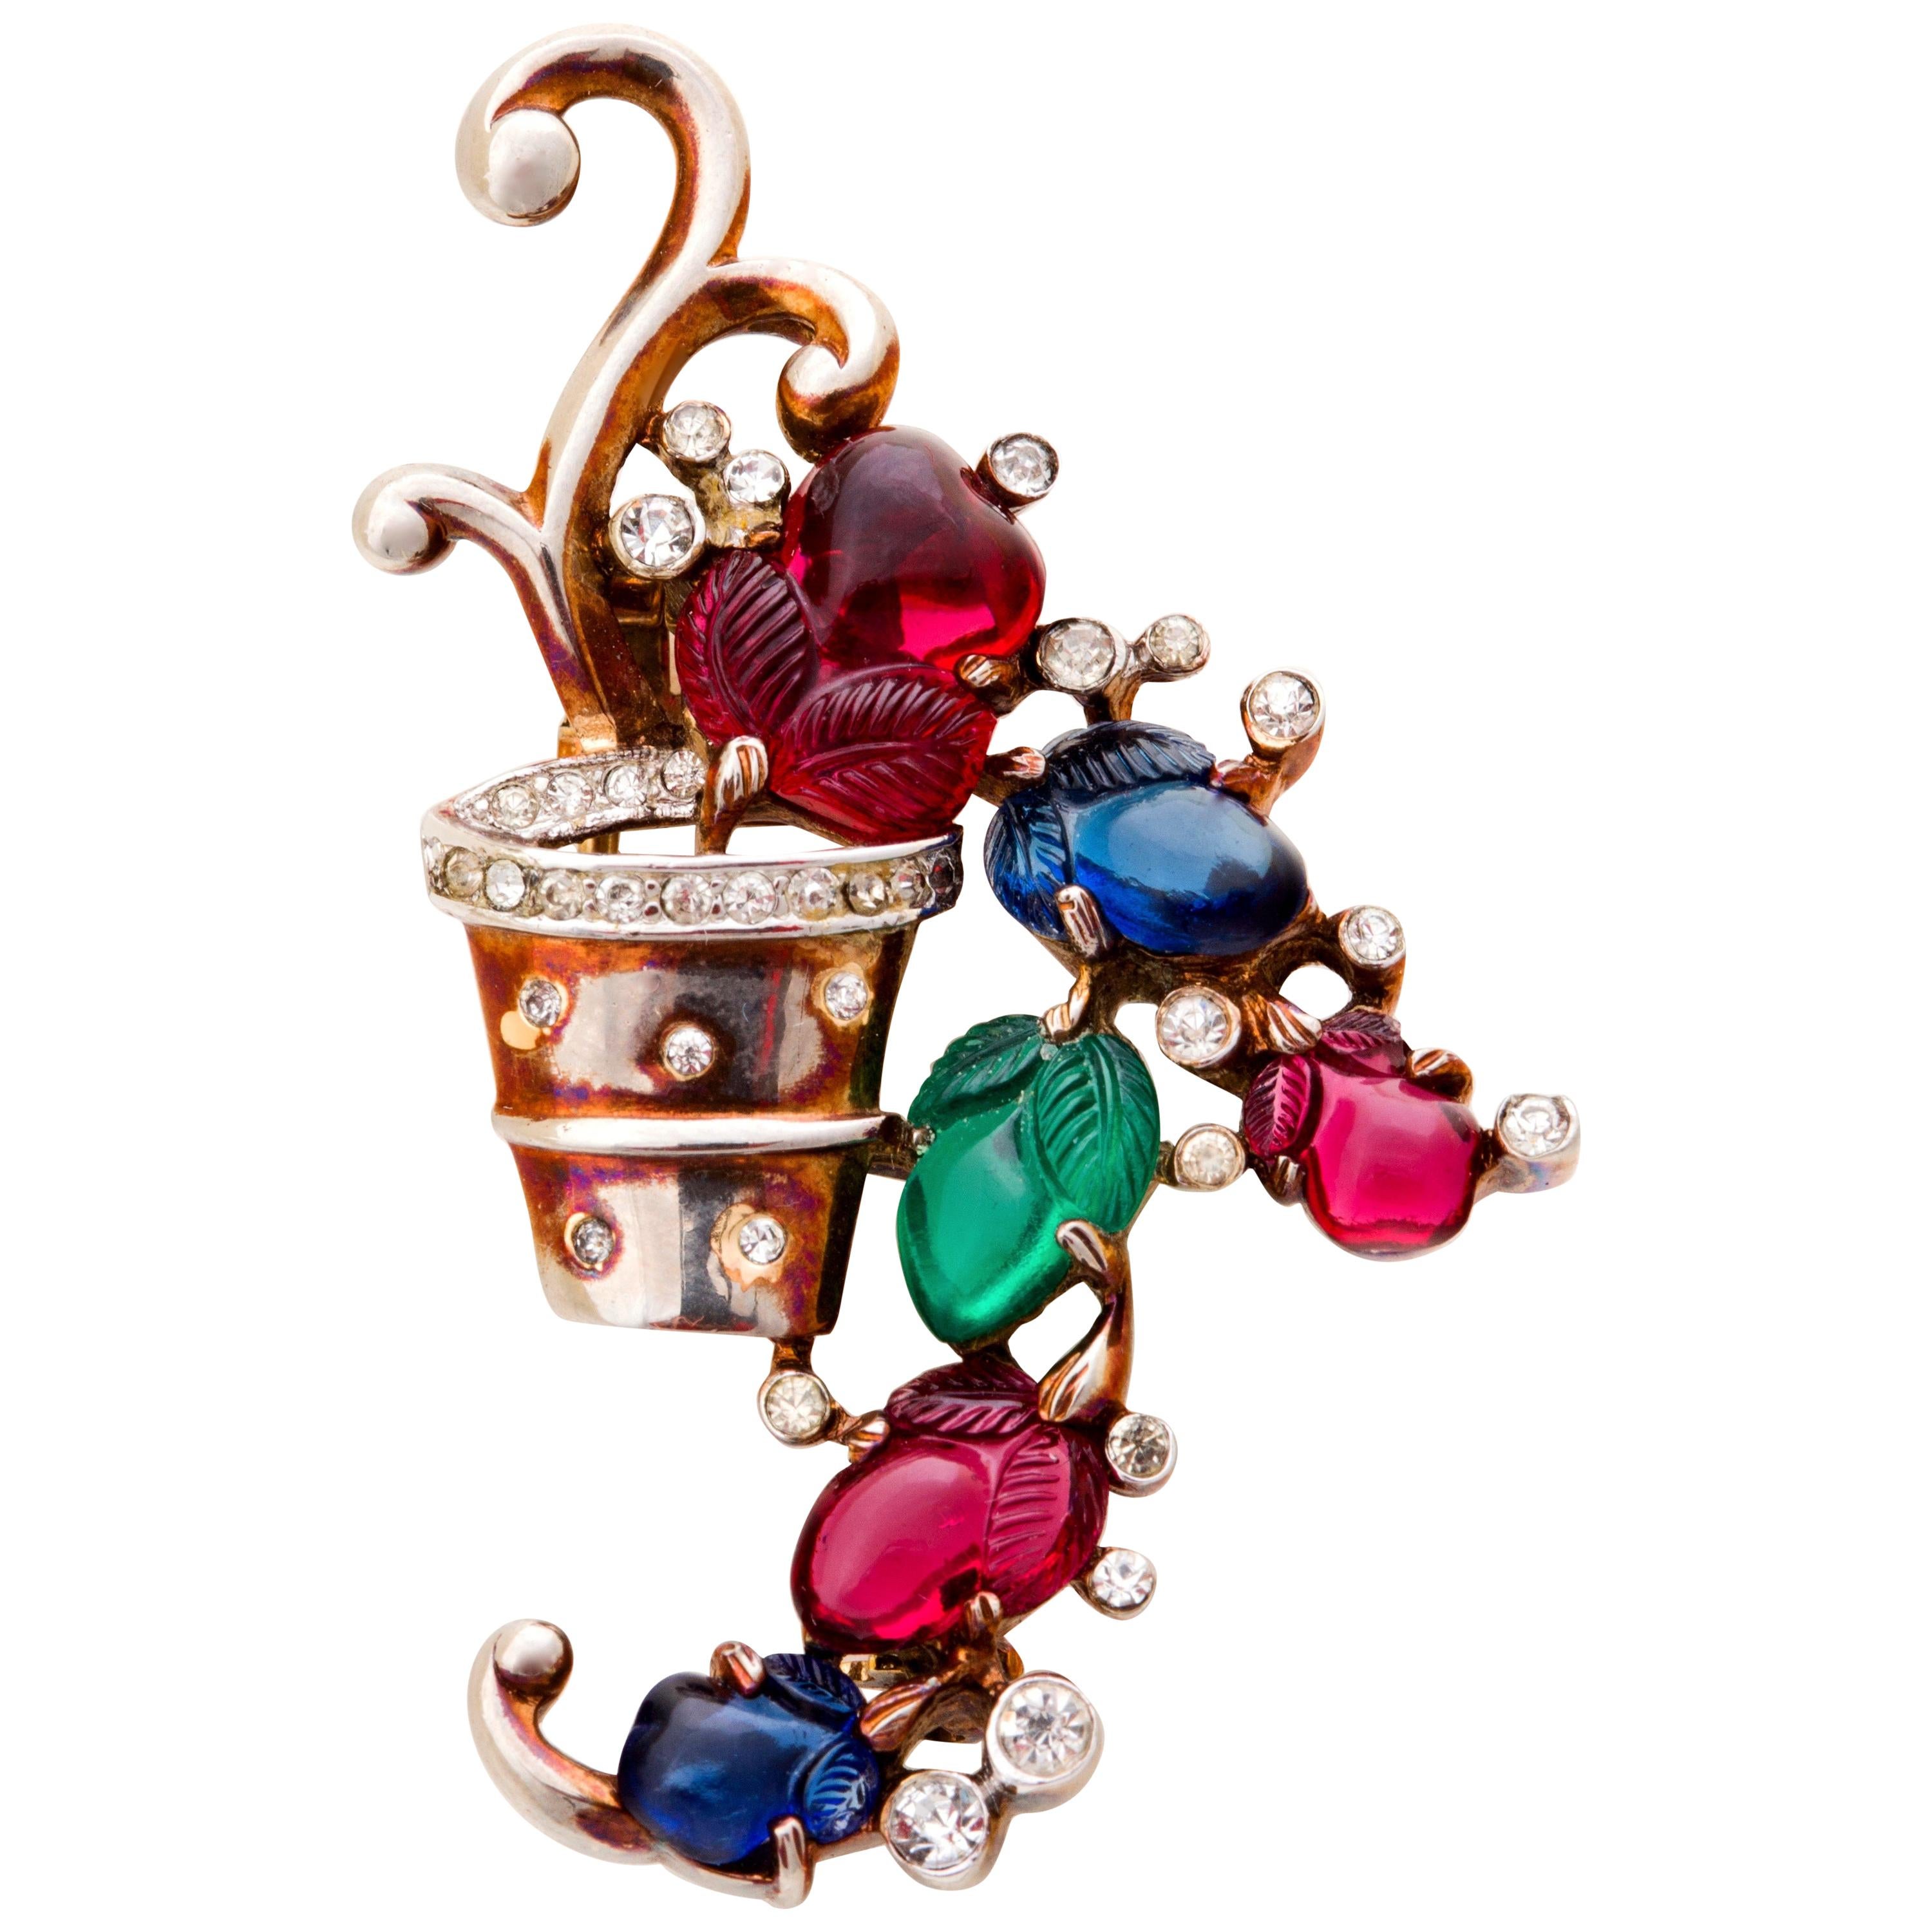 Fabulous Crown Trifari Tutti Fruiti Fruit Salad Clip Brooch by Alfred Philippe.  Vibrant colors form this flower pot of cascading fruit mixed with vibrant rhinestones.  Flower pot is more silver with hints of gilt which may over time have rubbed